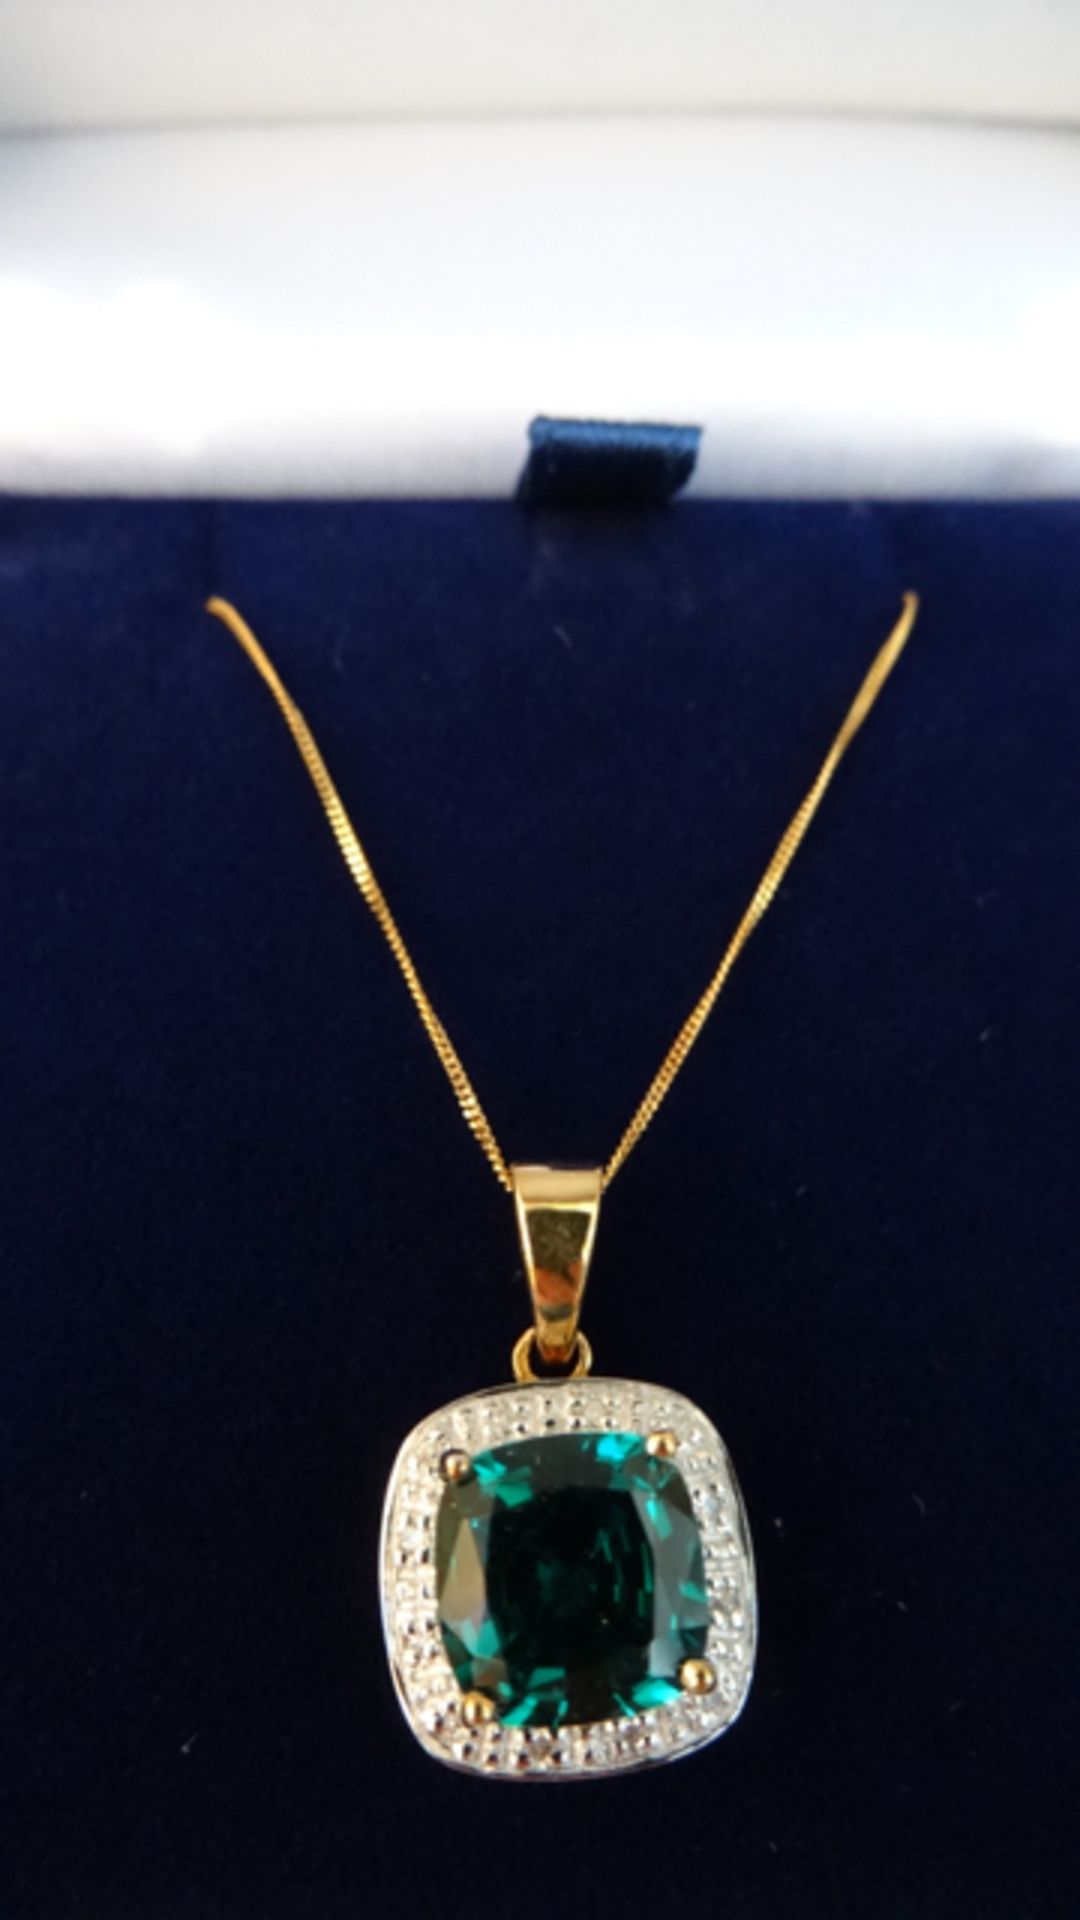 9ct Yellow Gold Chain with Emerald & Diamond Pendant. Beautiful piece, treat your loved one.